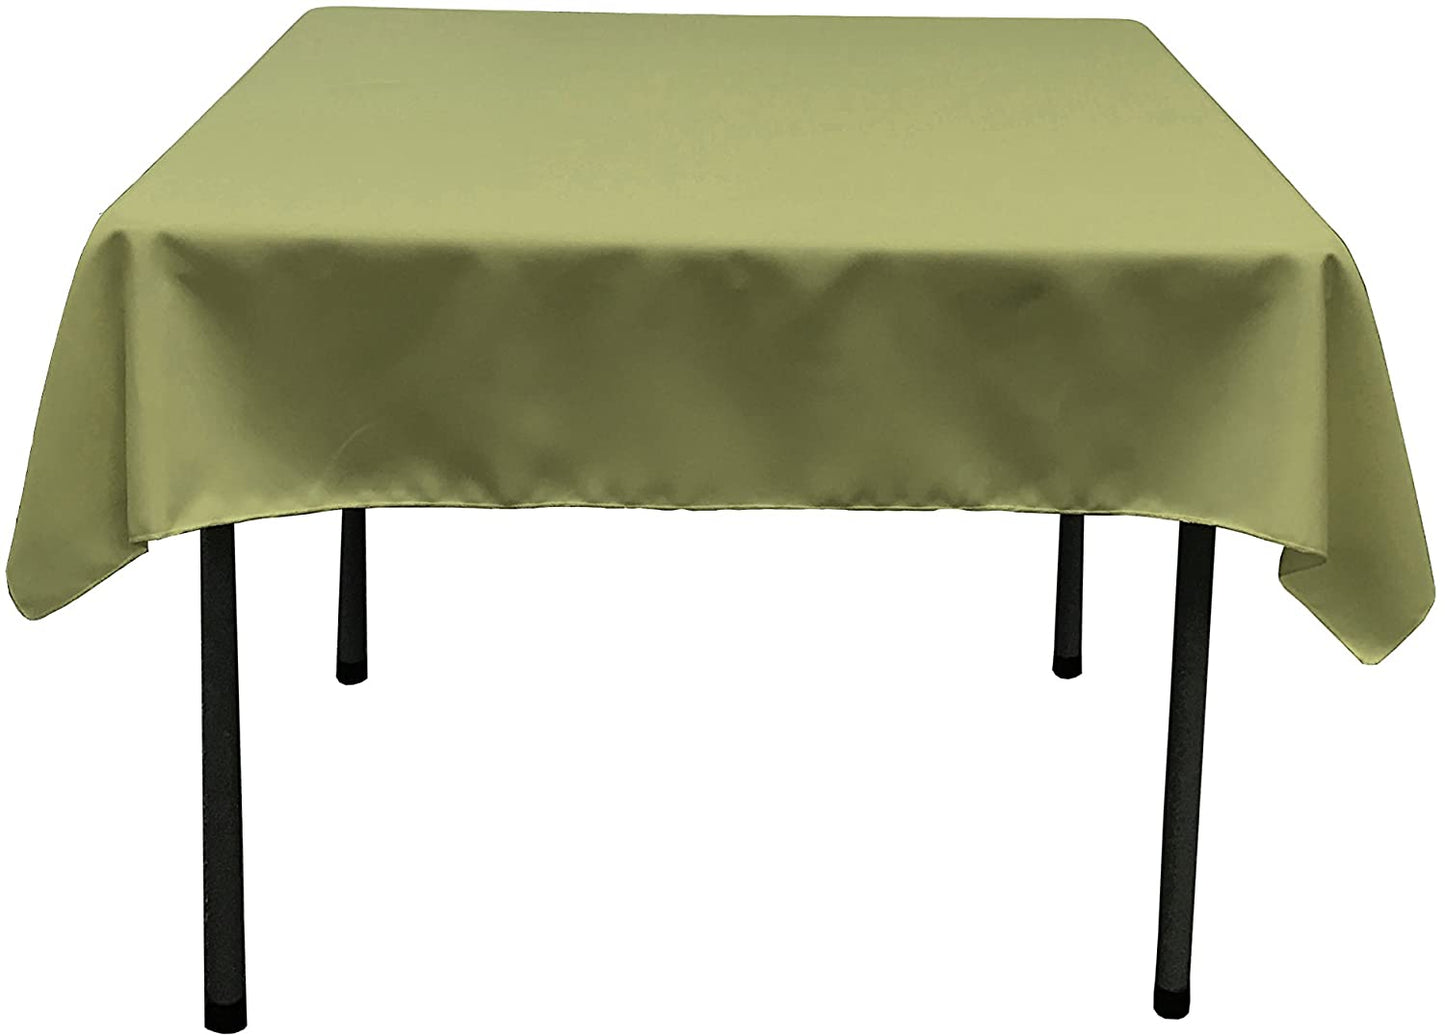 Polyester Poplin Washable Square Tablecloth, Stain and Wrinkle Resistant Table Cover Sage